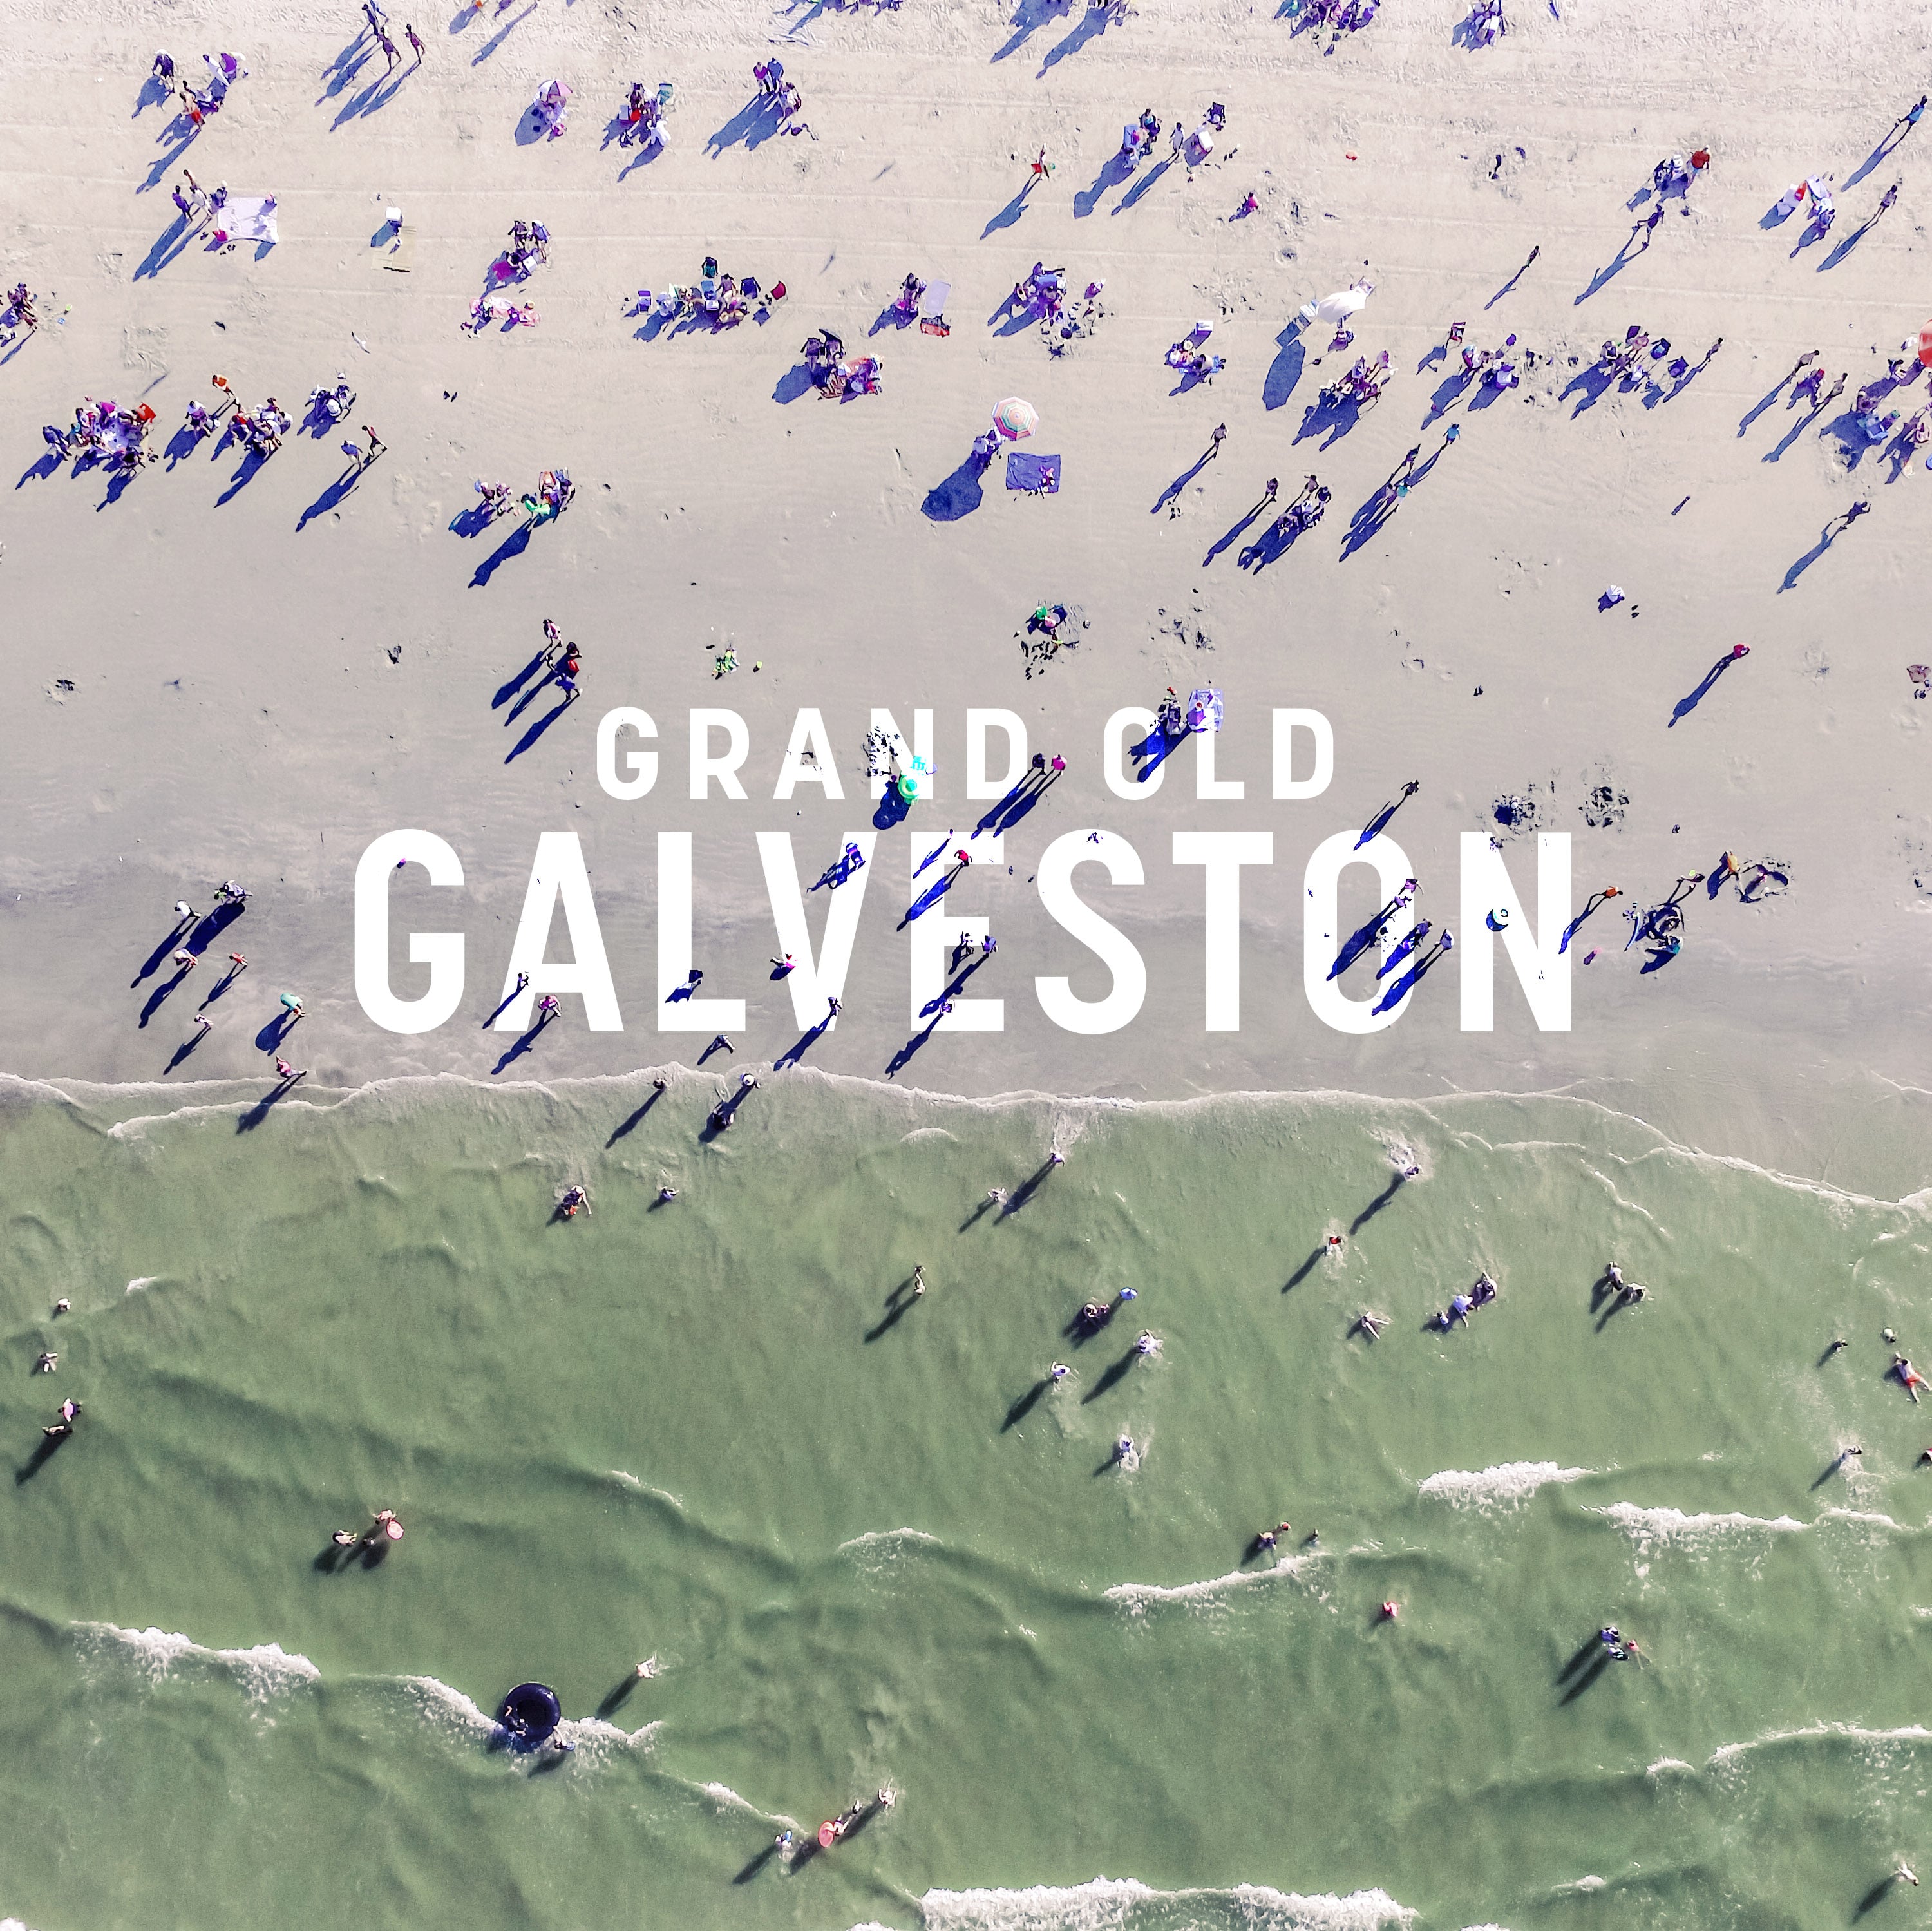 Visit Galveston Texas for history, swimming, beach, ghosts and touristy beach life